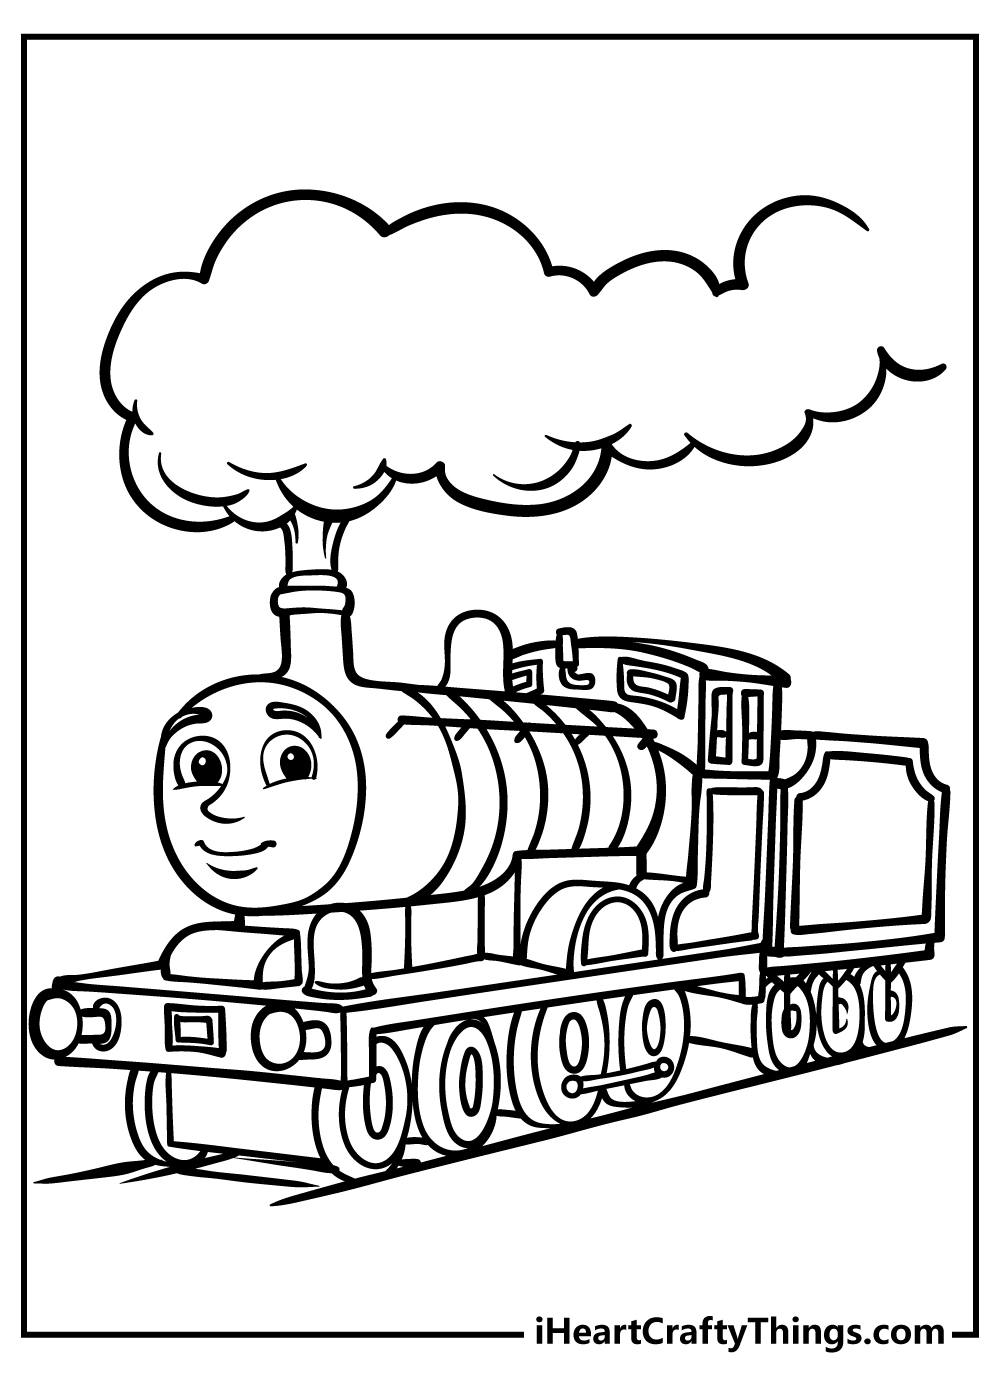 Thomas the Train coloring pages free printable